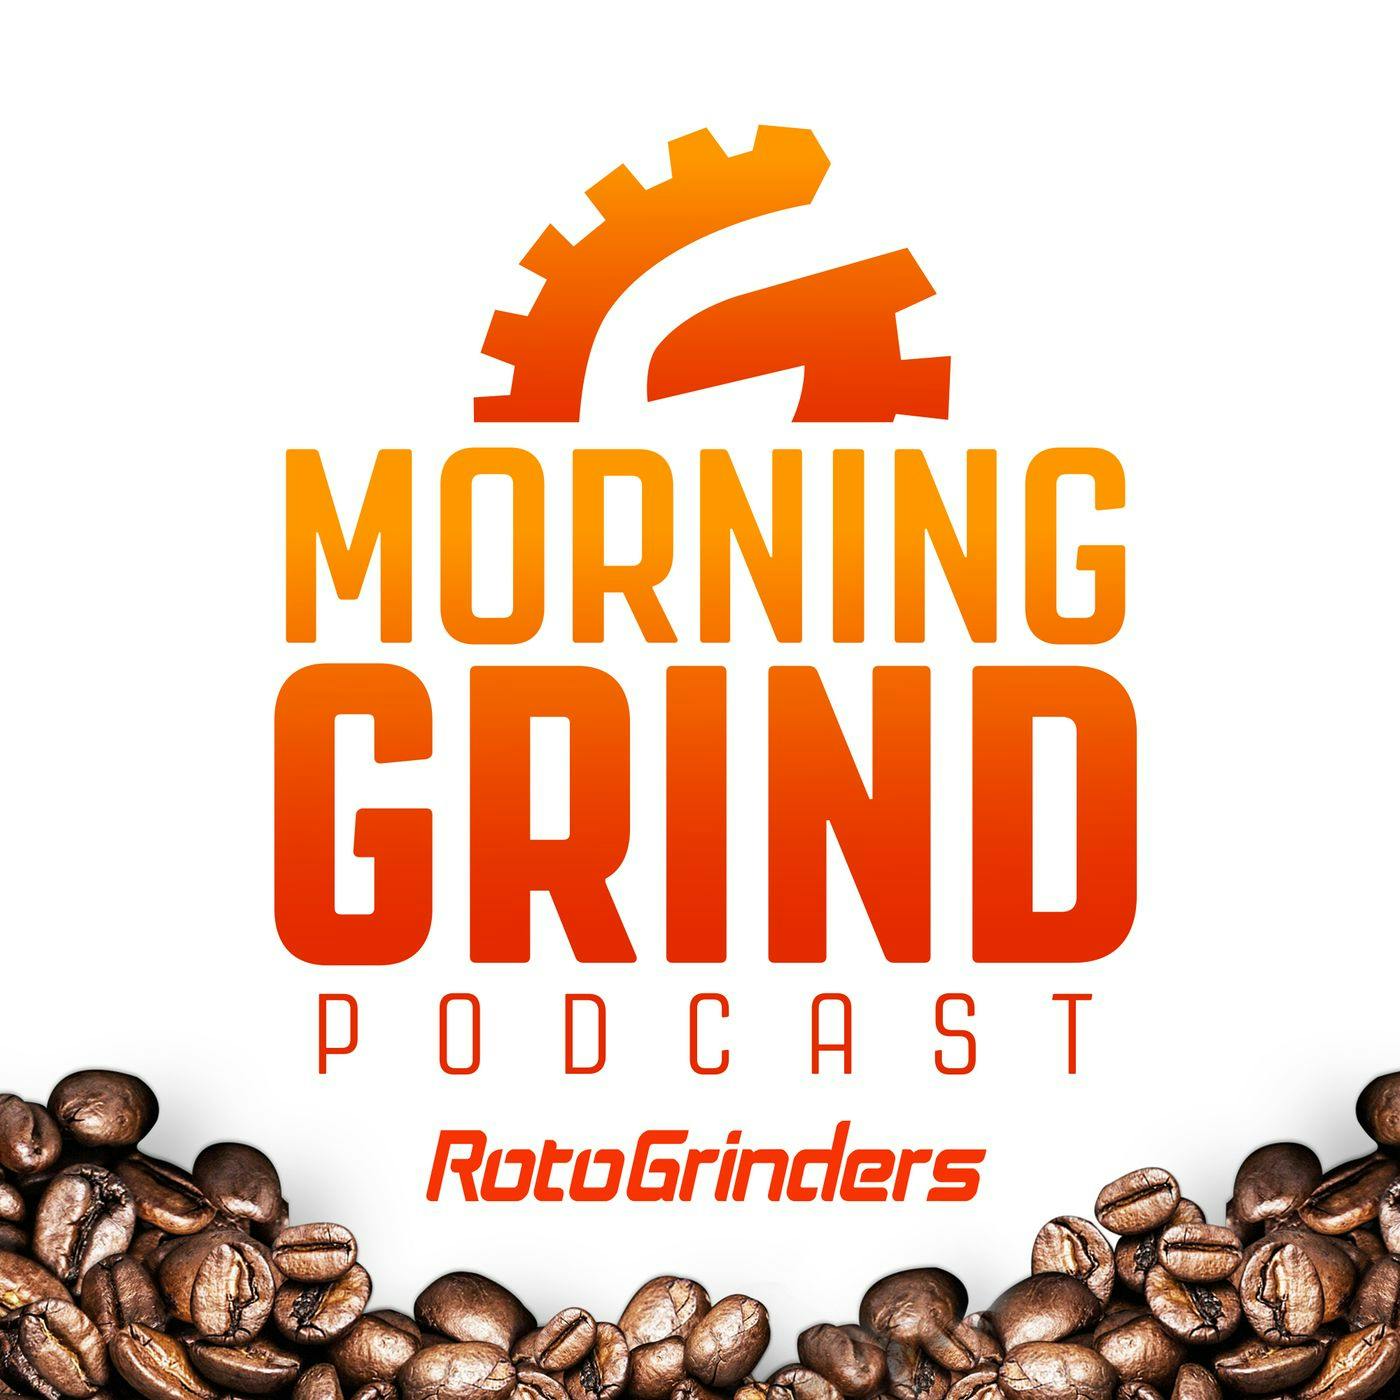 MLB Morning Grind: 10/8/2021 - If You Need To Pivot He's A Great Option